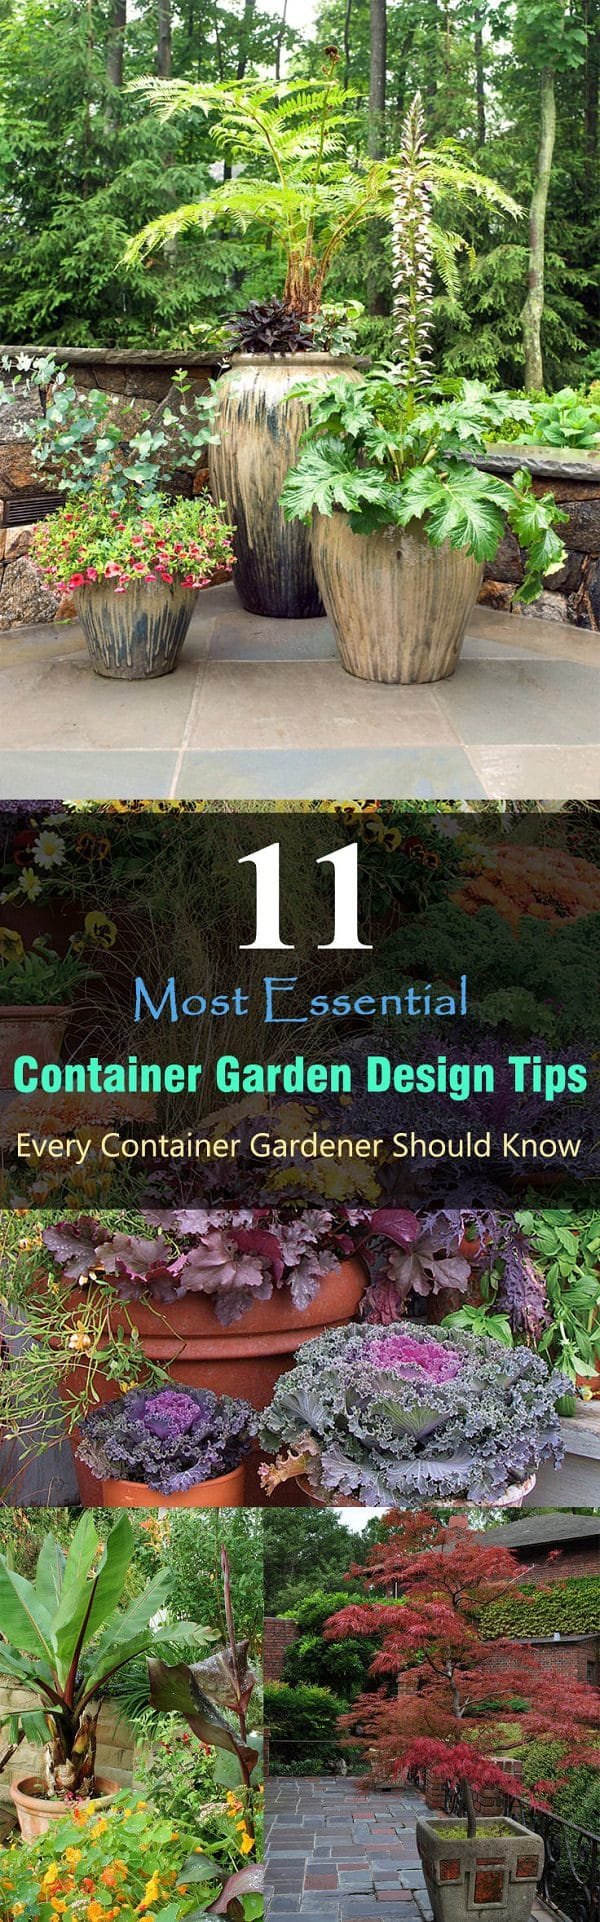 With these 11 important container garden design tips, you can create a beautiful container garden even in a limited space